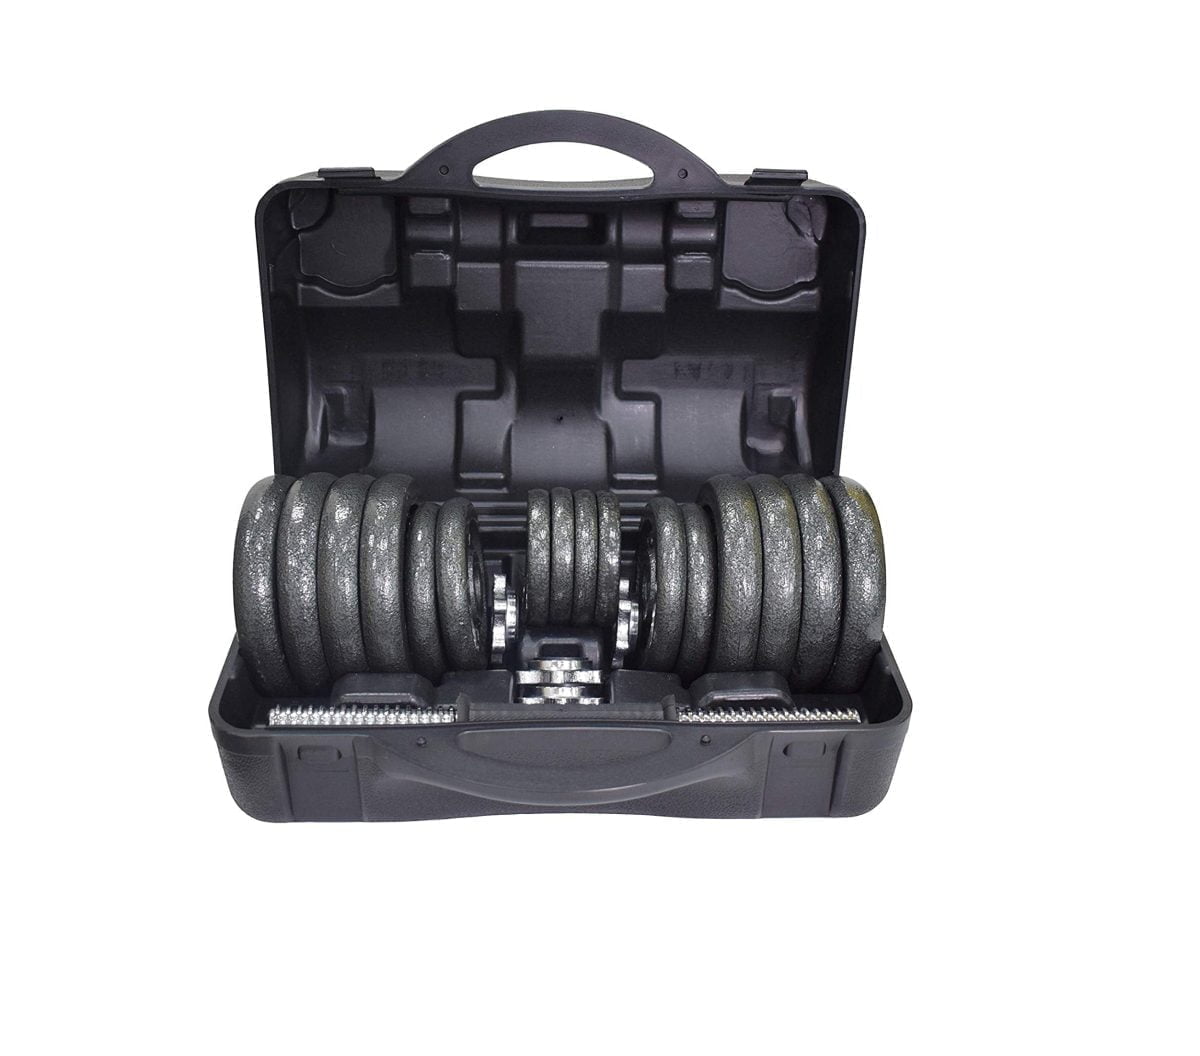 81Ogqeugkbl. Ac Sl1500 The Fitness 30 Kg Cast Iron Dumbbell Set Is Designed For Home Toning And Strength Workout Usage. The Traditional 1″ Standard Cast Plate Design Is Easy To Pick Up And Load Onto The Bars With The Quality Spinlock Collars Ensuring A Safe And Secure Fit On The Bar, Along With Quick Plate Changes. The Knurled Black Dumbbell Sleeves Ensures A Great Grip Whilst Working Out. The Dumbbell Set Can Be Used For A Wide Range Of Exercises To Help Pump Your Muscles And Tone Your Arms. Dumbbell Set 30 Kg With Case Dumbbell Set 30 Kg With Case